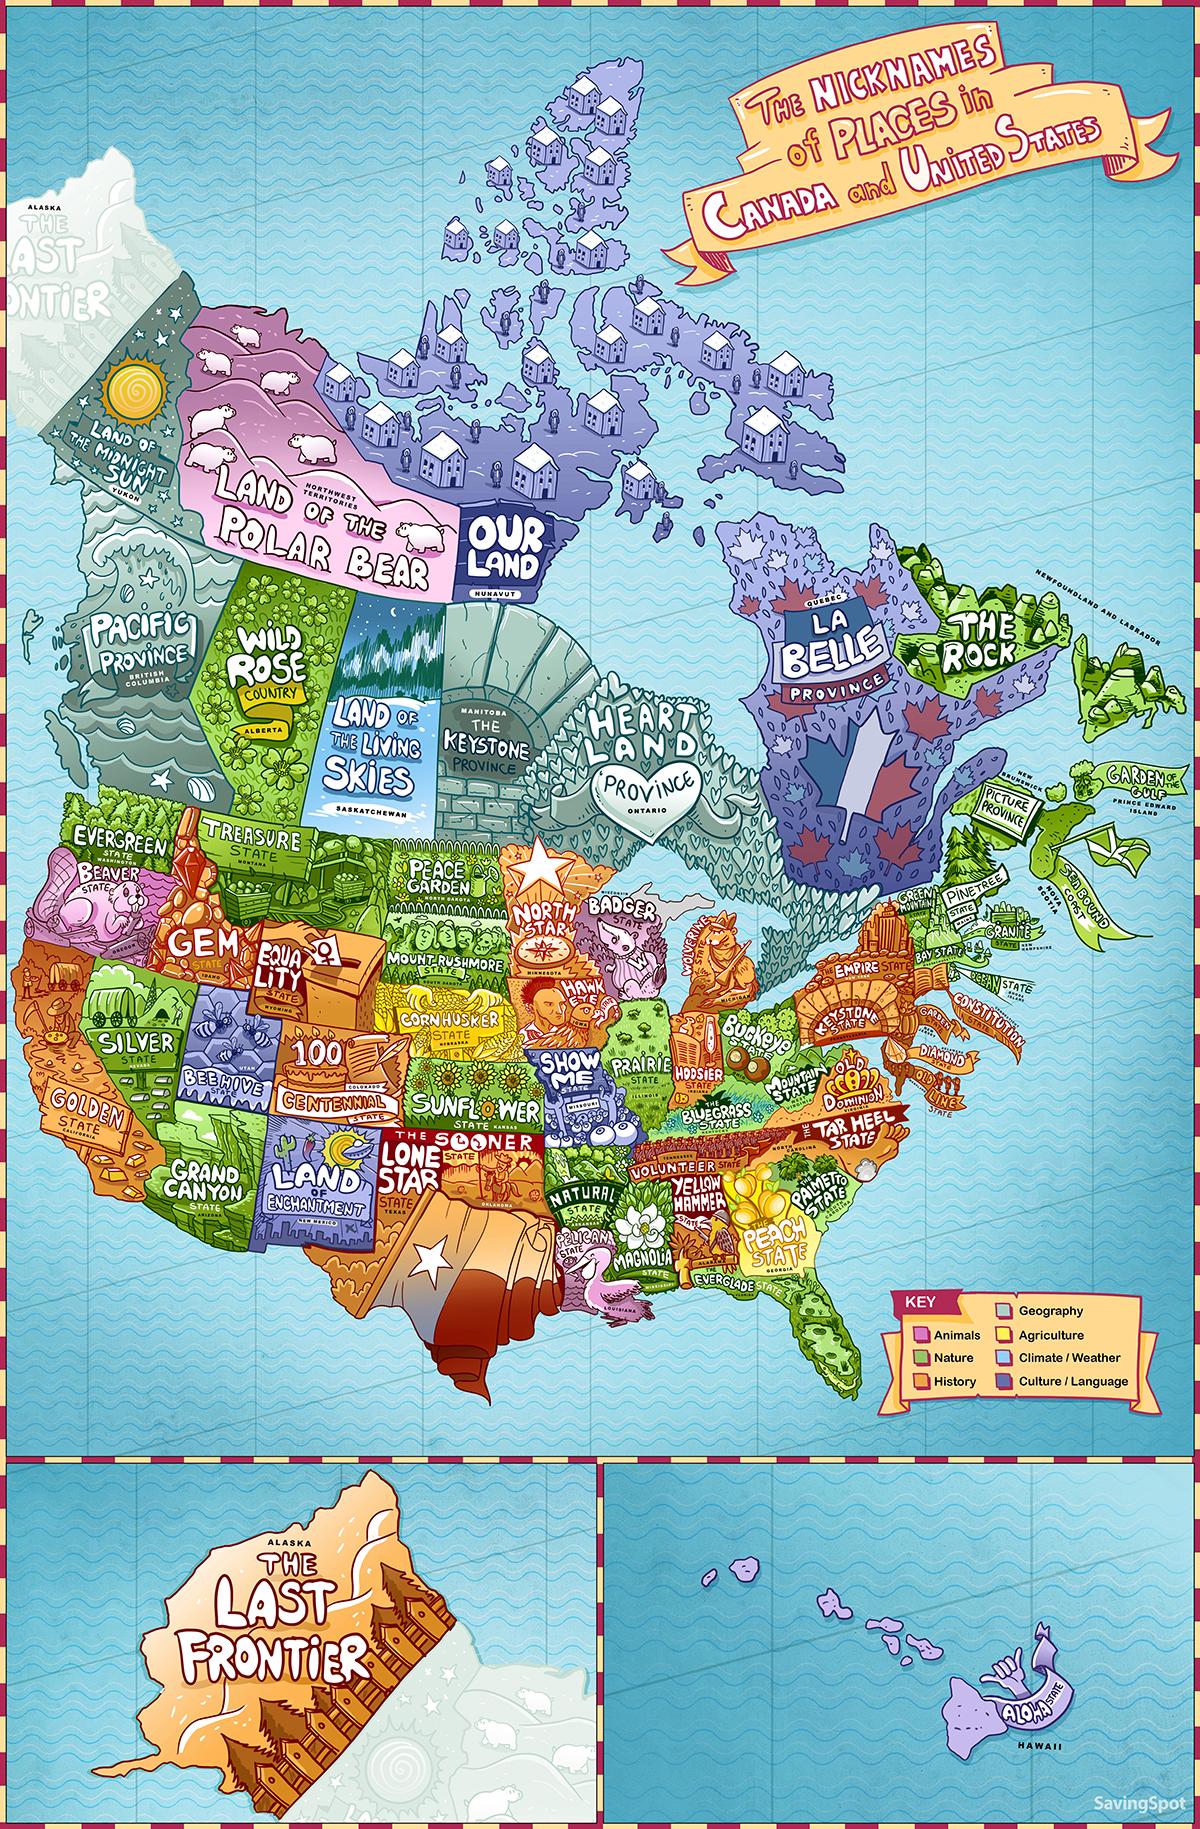 The a huge selection of Nicknames for US states and Canadian Provinces [by Barbara Davidson]